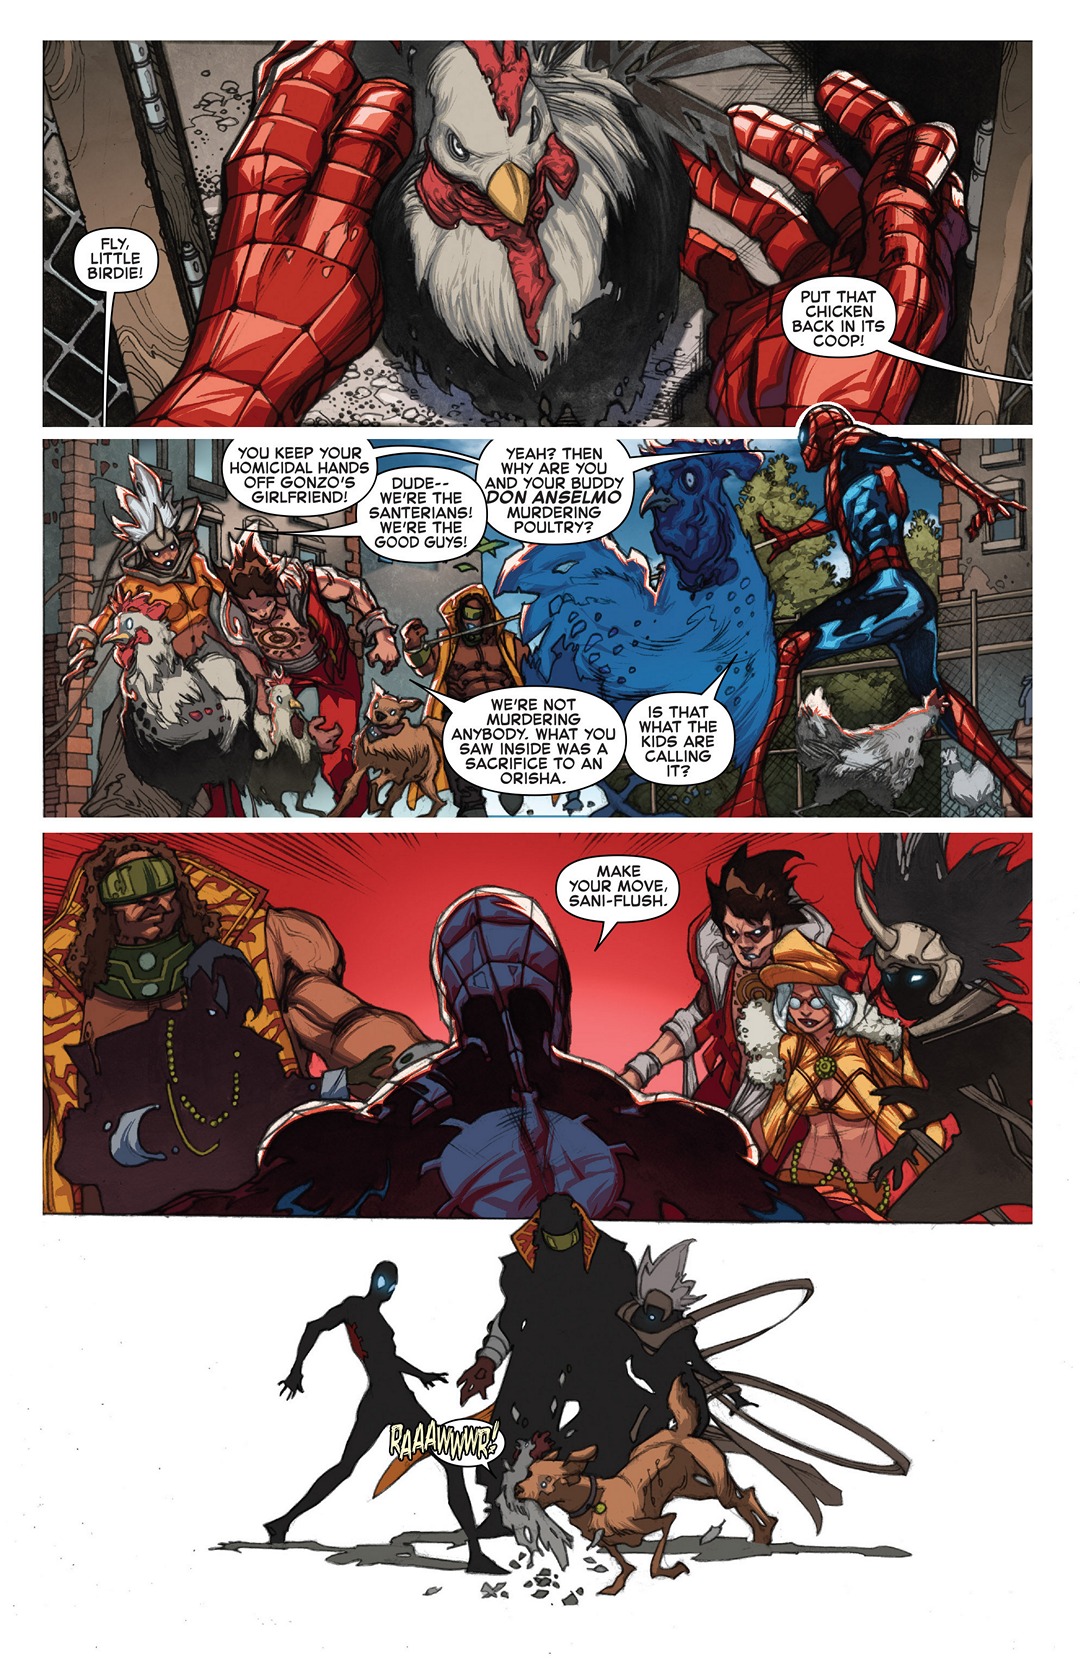 The Amazing Spider-Man (2015-): Chapter 1-2 - Page 3